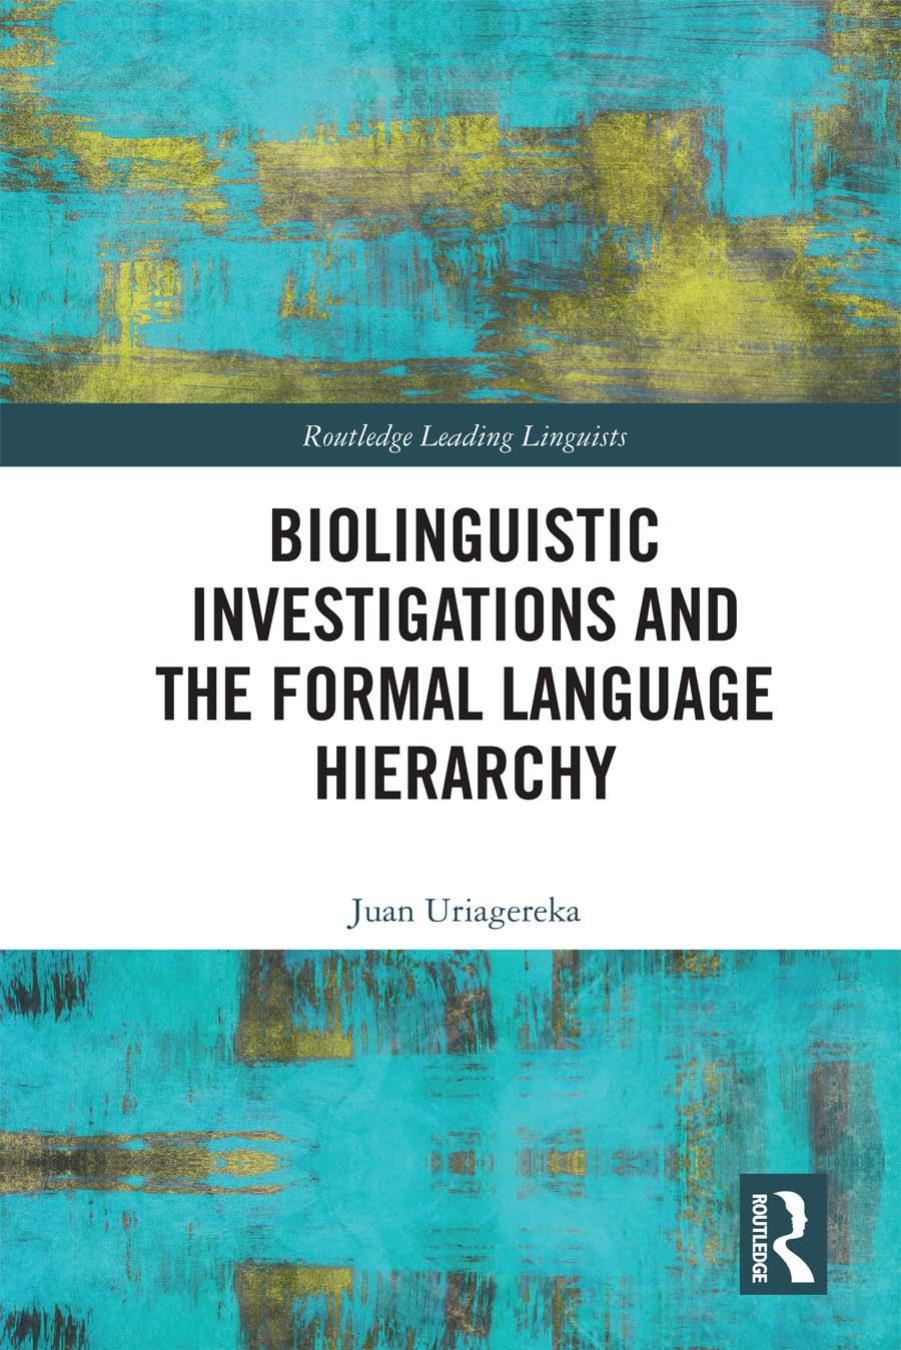 Biolinguistic investigations and the formal language hierarchy 2018